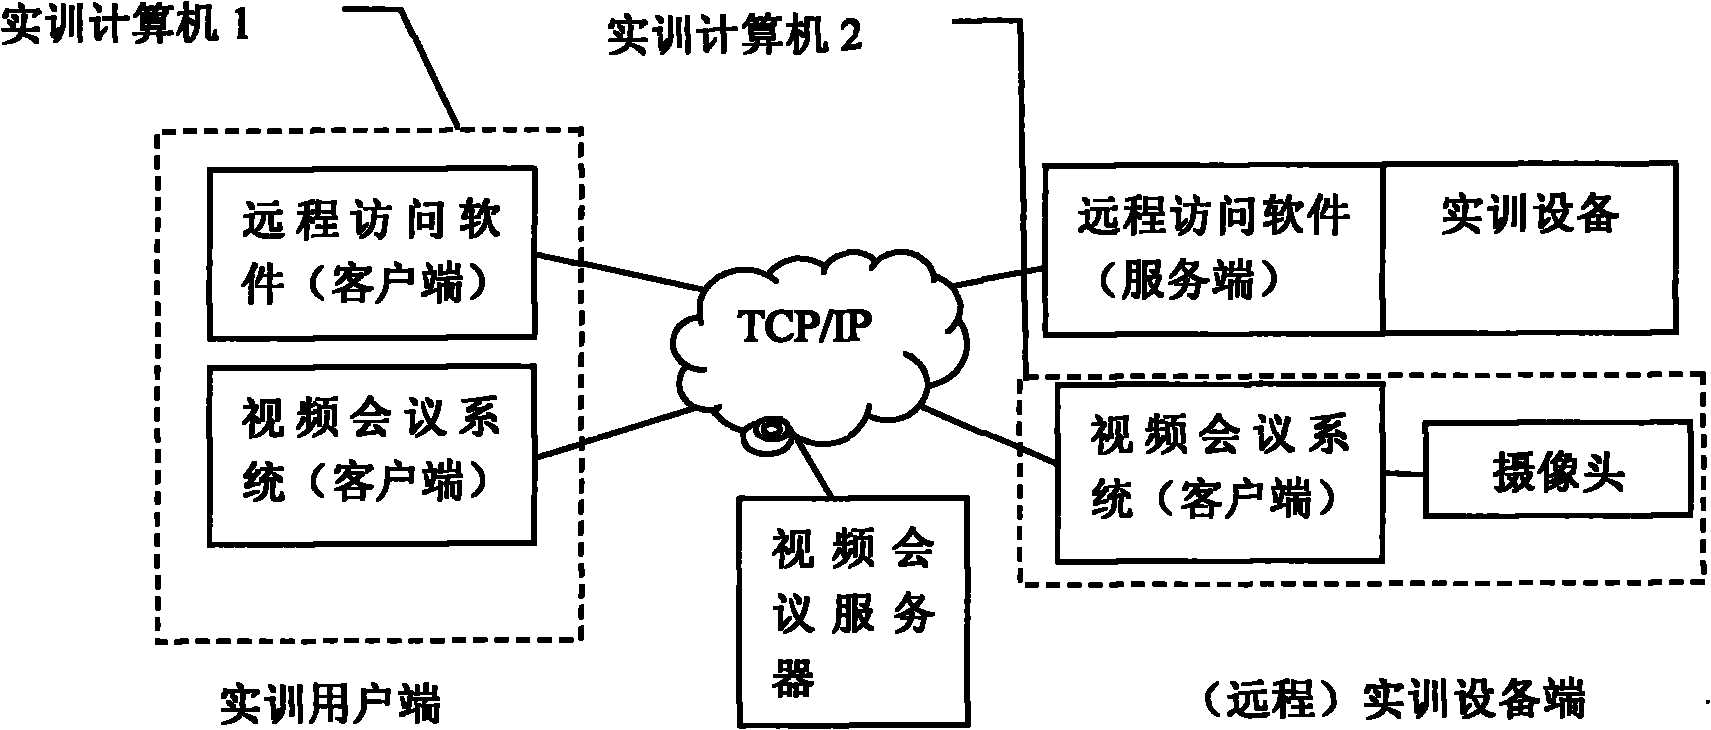 Remote access and video conference system-based remote practical training method